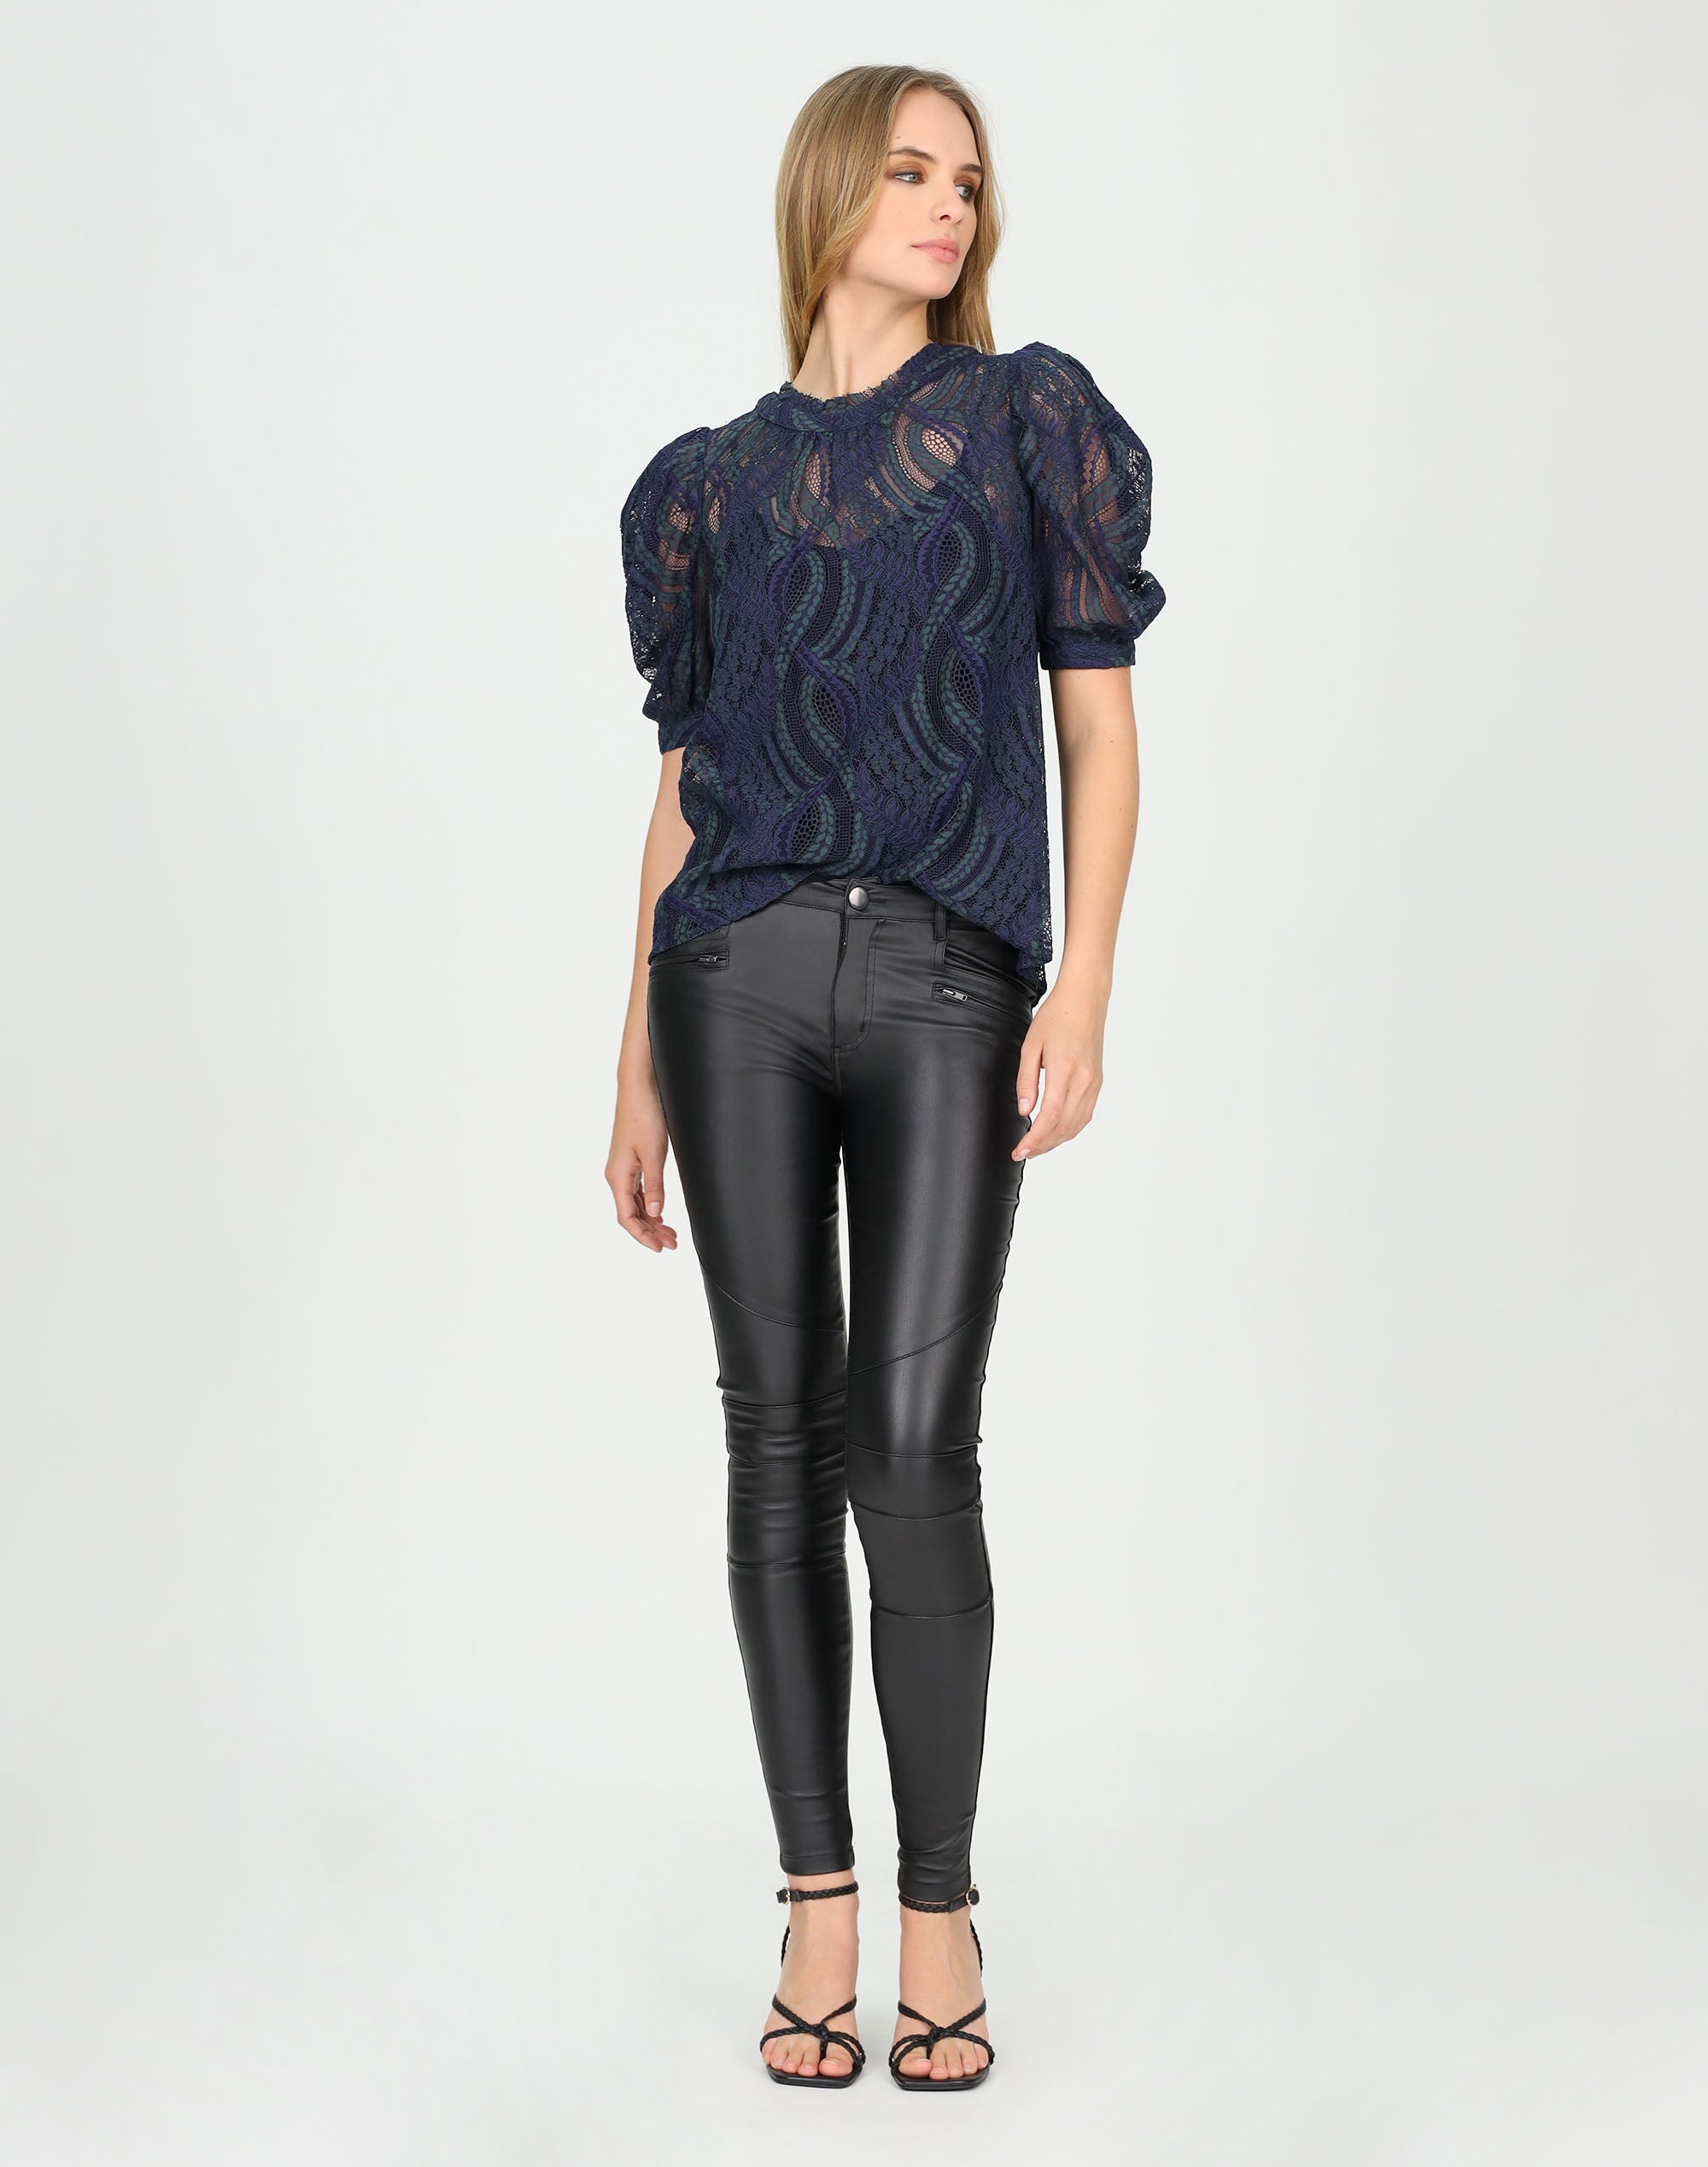 Duo Lace Top